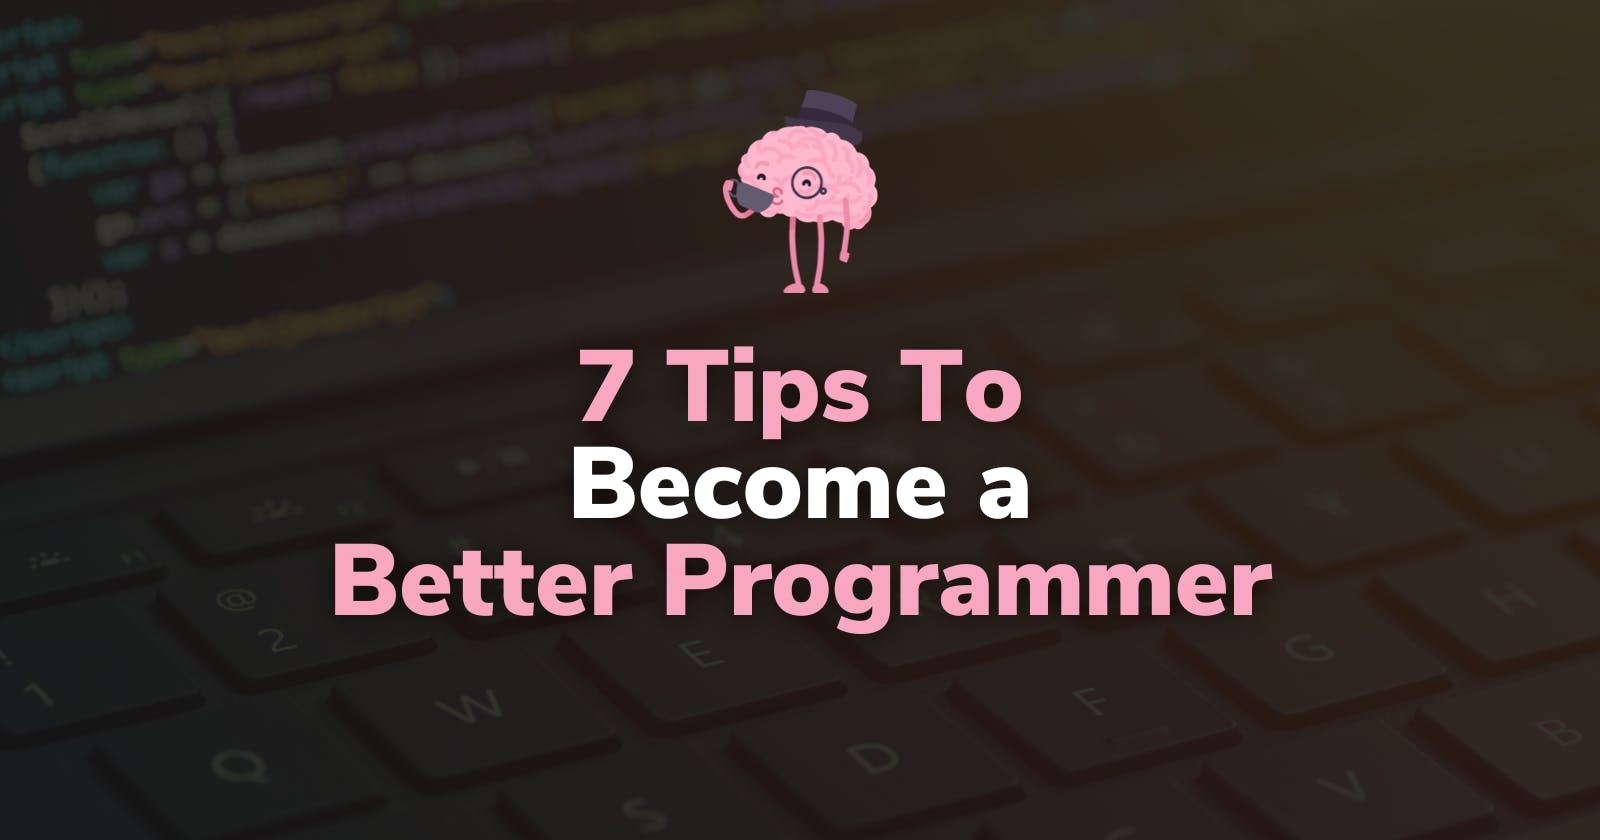 7 Tips To Become a Better Programmer